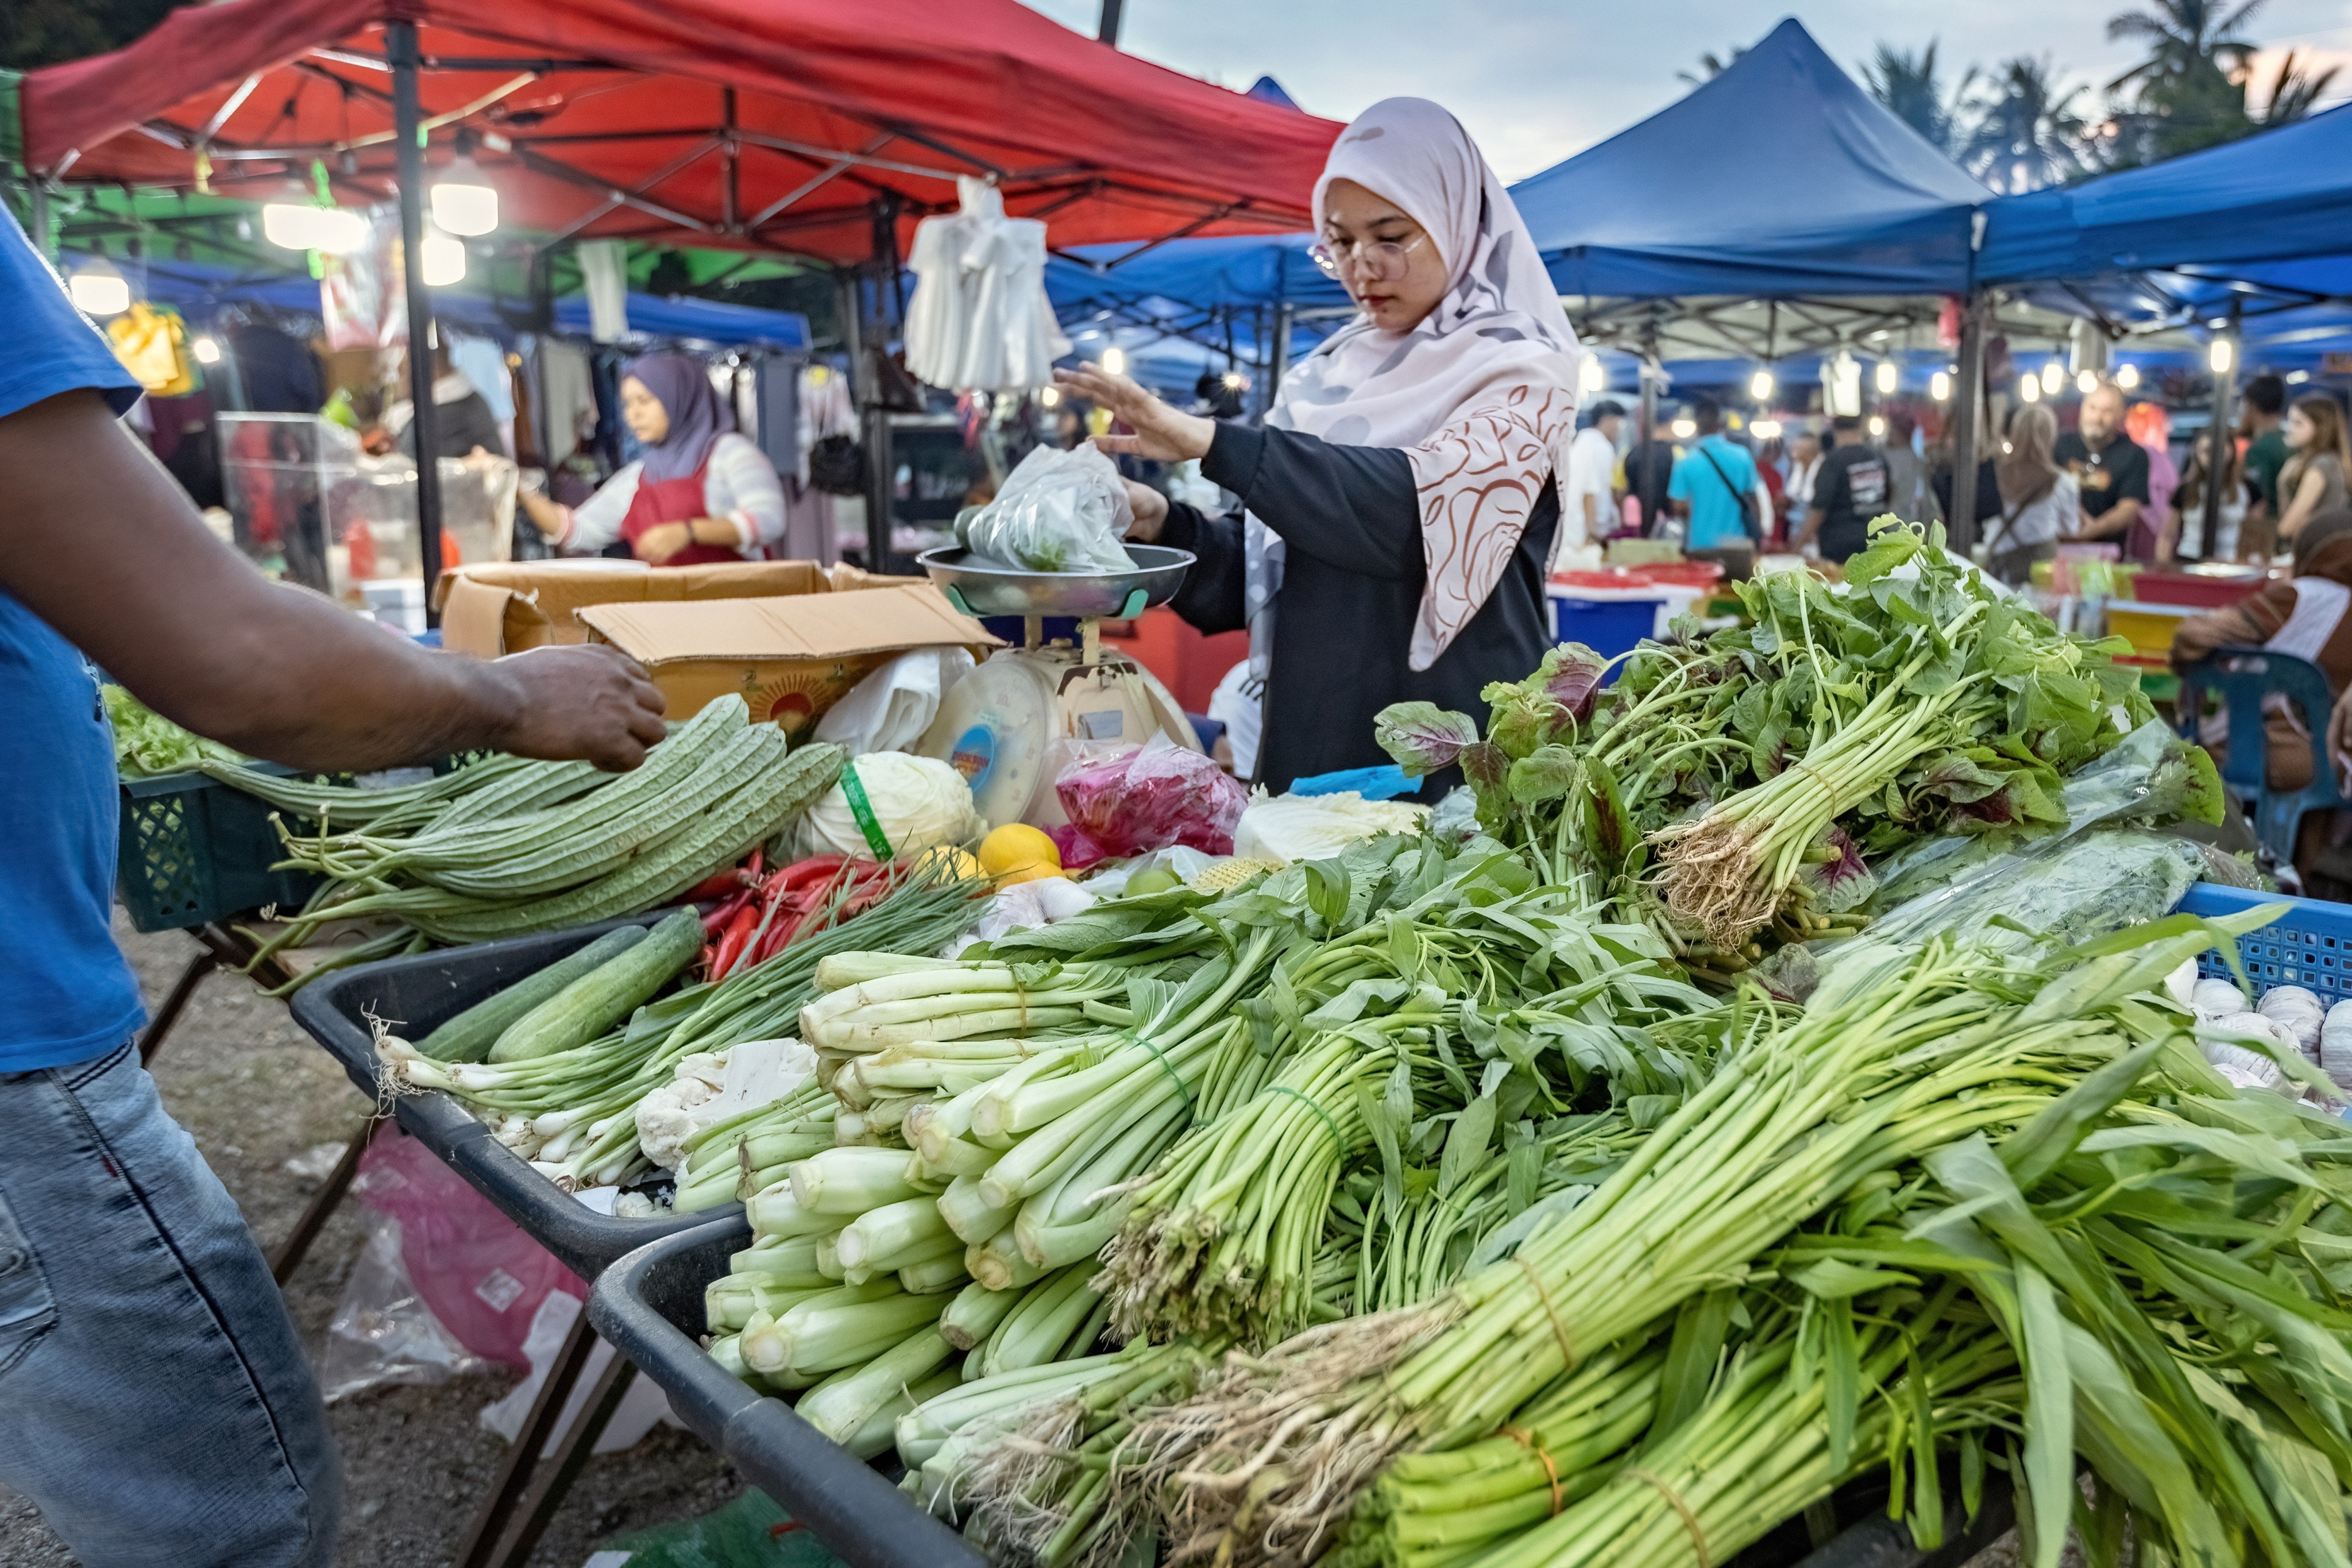 A vegetable stall at a night market in Malaysia. Photo: Shutterstock